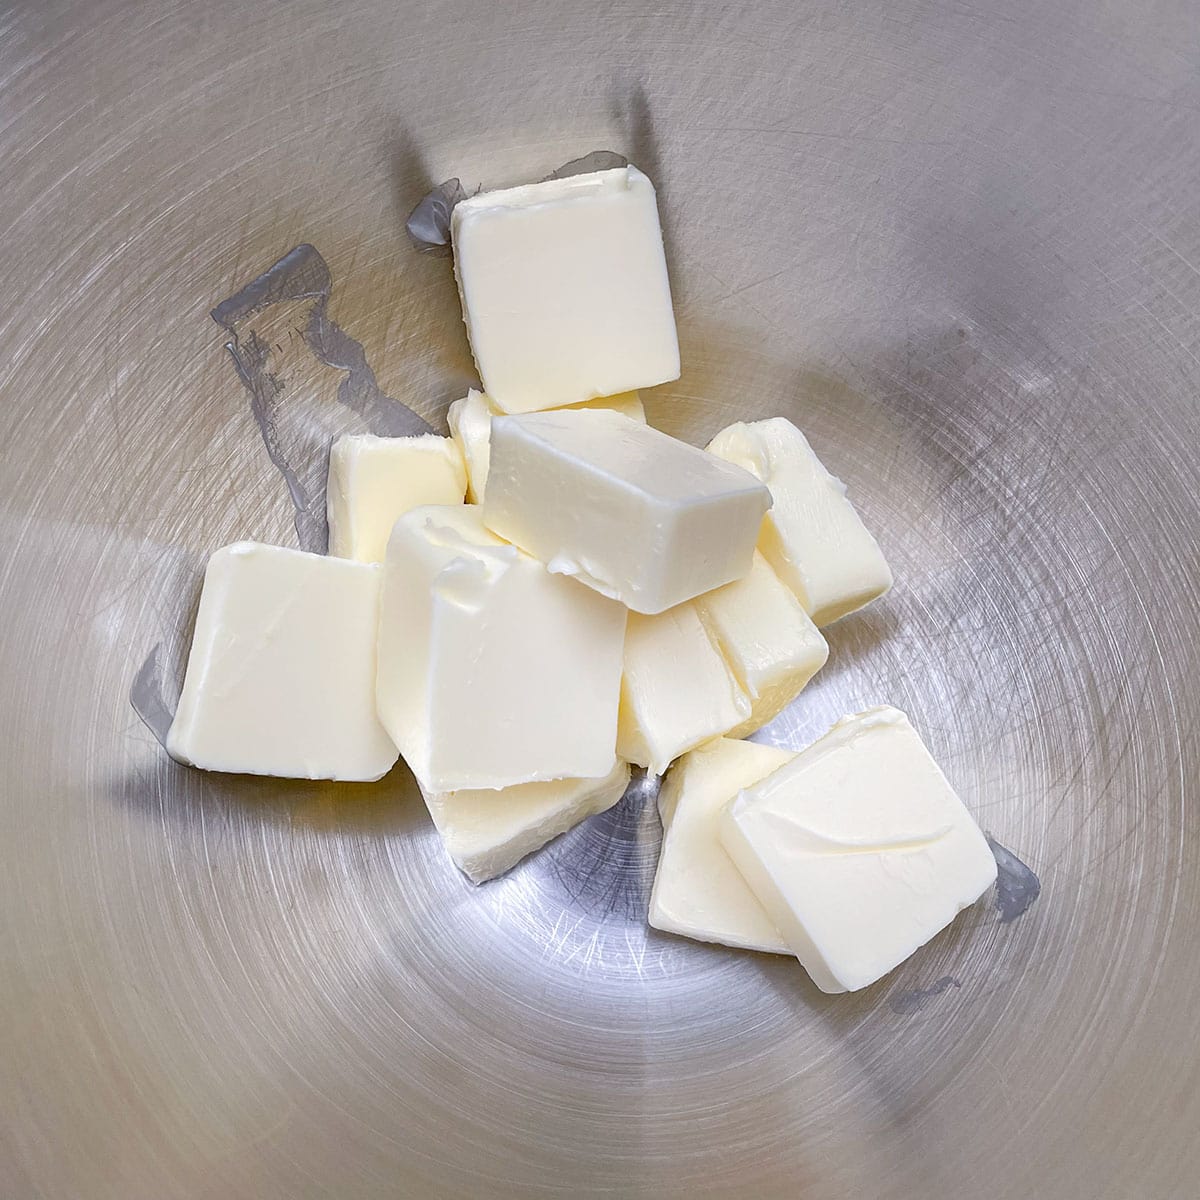 Cubed butter sitting in a mixer bowl getting ready to be creamed.